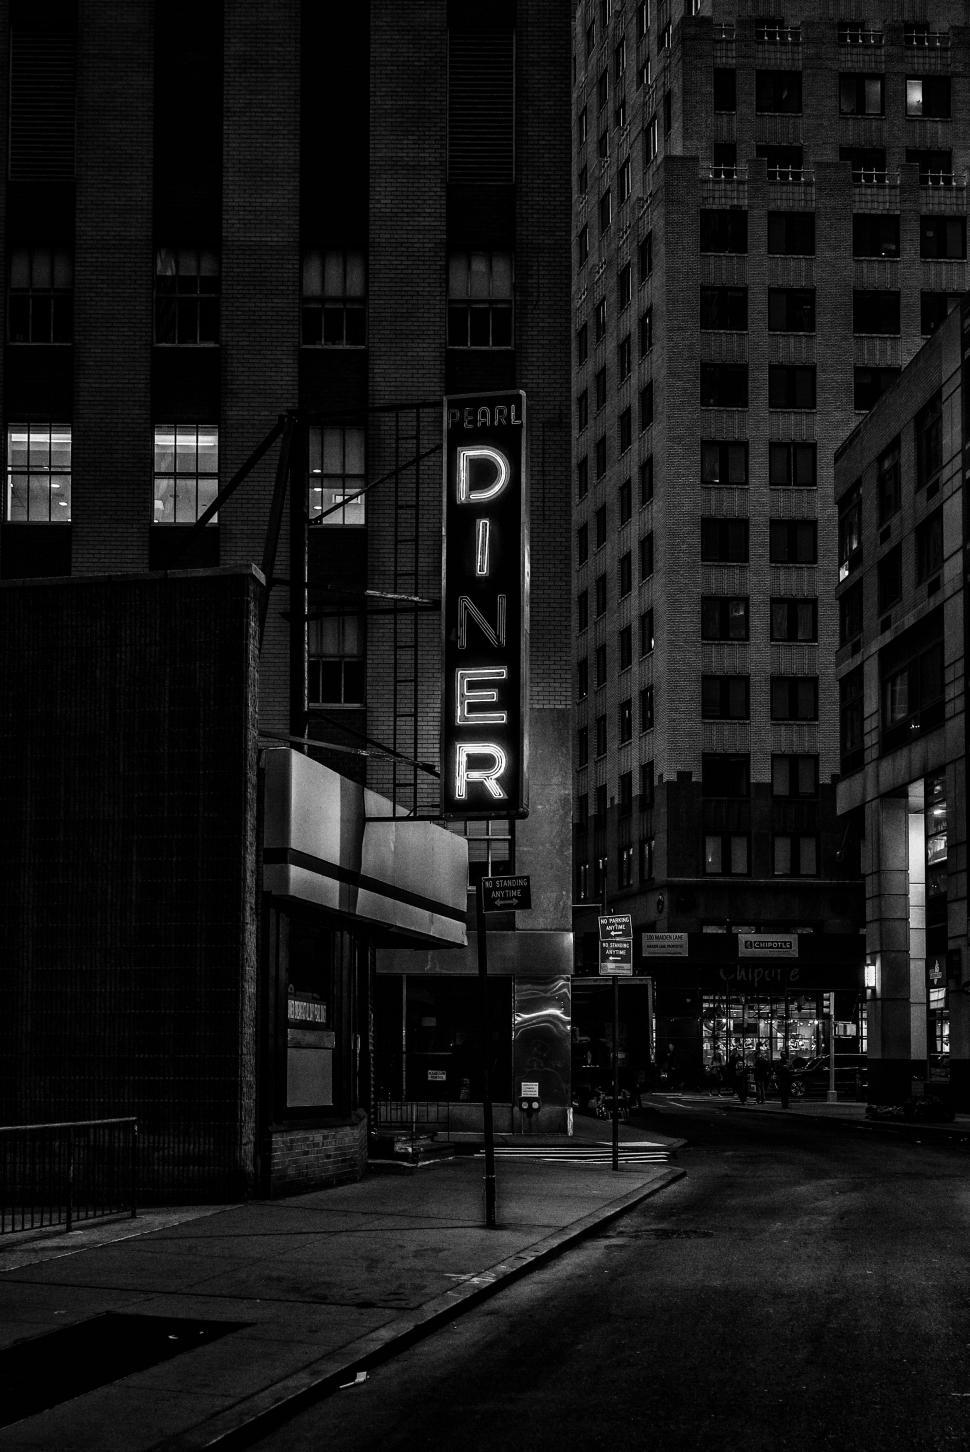 Free Image of Vintage Diner Sign in Black and White 